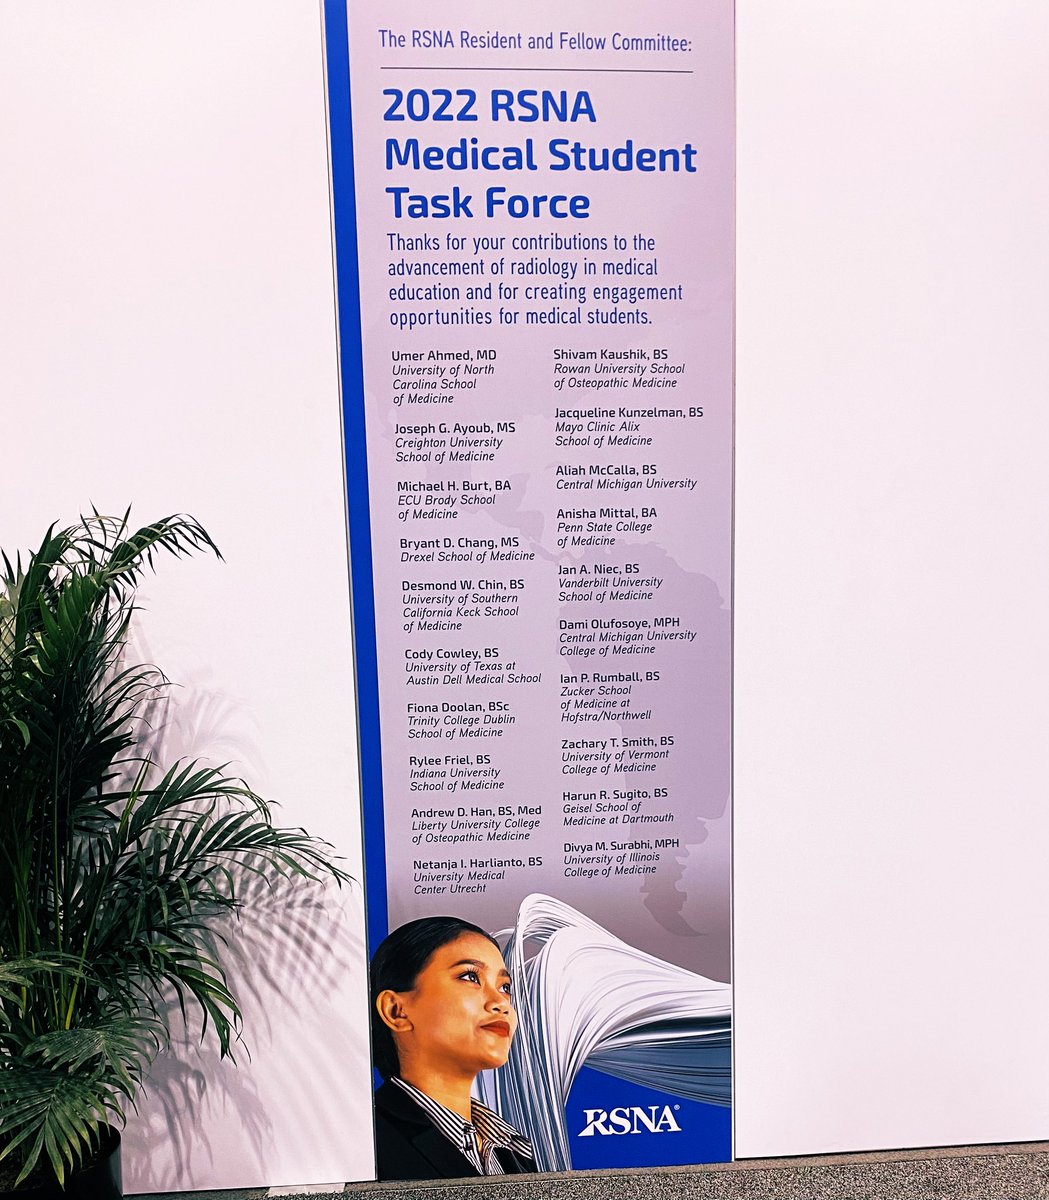 I was not expecting to see my name at #RSNA2022, but I am extremely grateful to the RSNA Medical Student Task Force for allowing me to make such great connections. It was nice finally meeting fellow members in person! #RSNA22 #RSNATrainees